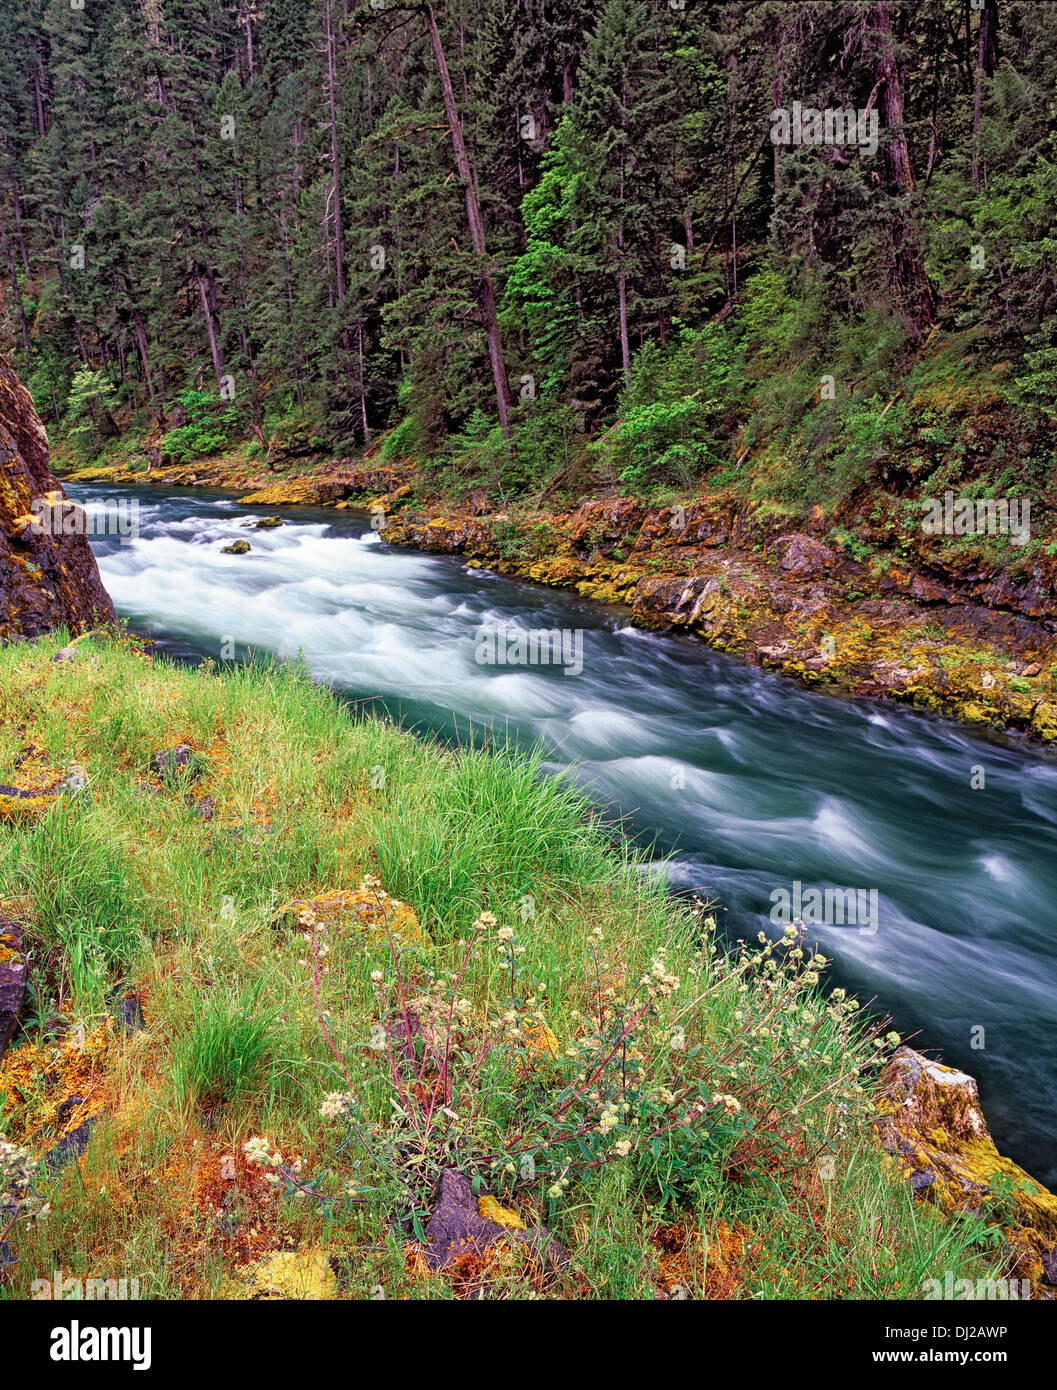 The Wild and Scenic North Umpqua River rushes past the spring greenery in southern Oregon's Douglas County. Stock Photo